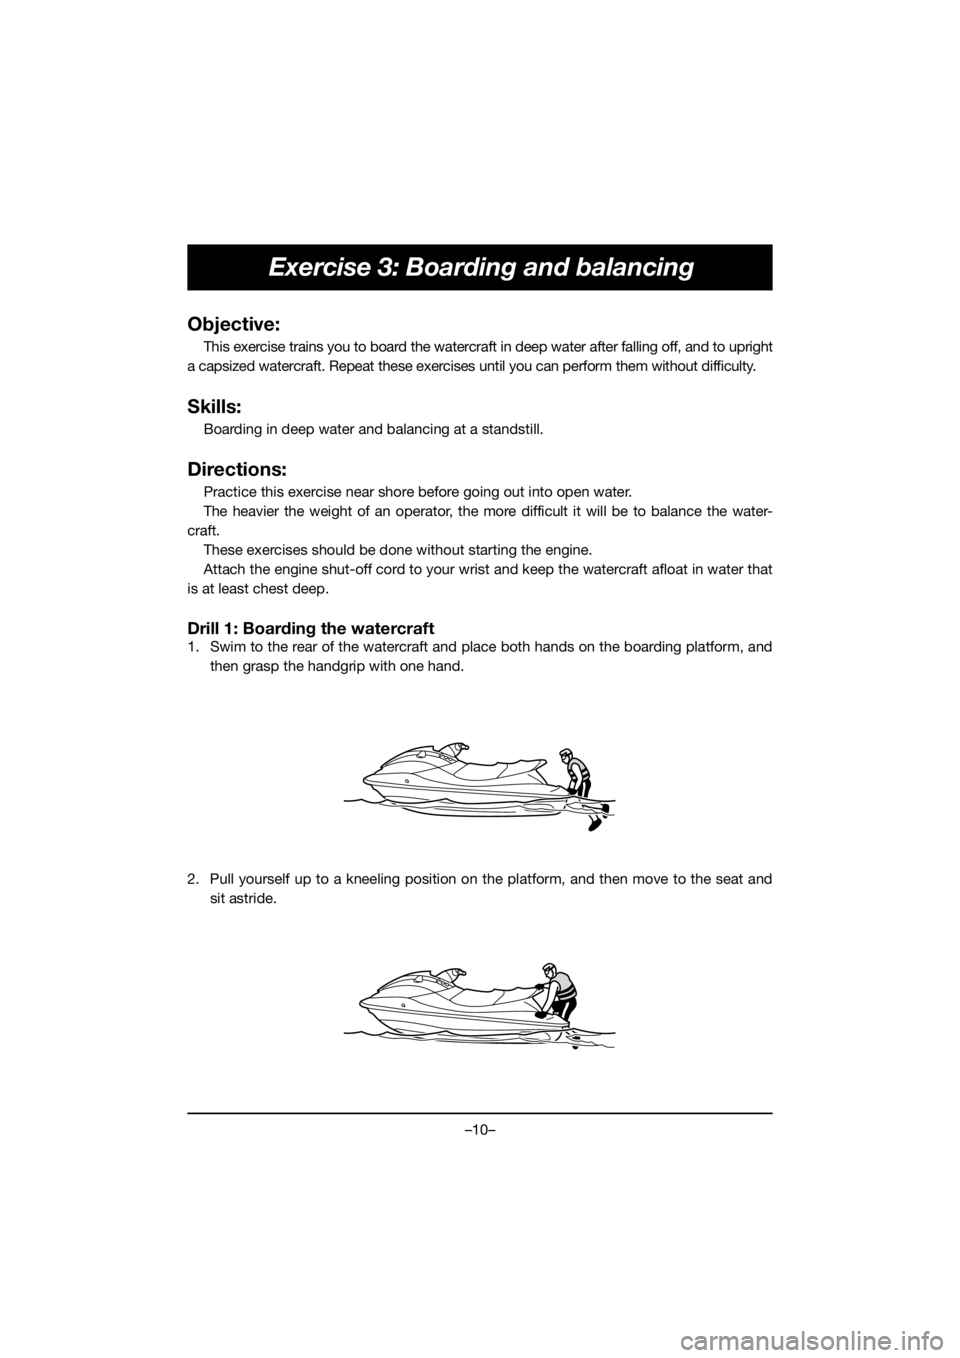 YAMAHA FJR1300 2020 User Guide –10–
Exercise 3: Boarding and balancing
Objective:
This exercise trains you to board the watercraft in deep water after falling off, and to upright
a capsized watercraft. Repeat these exercises un